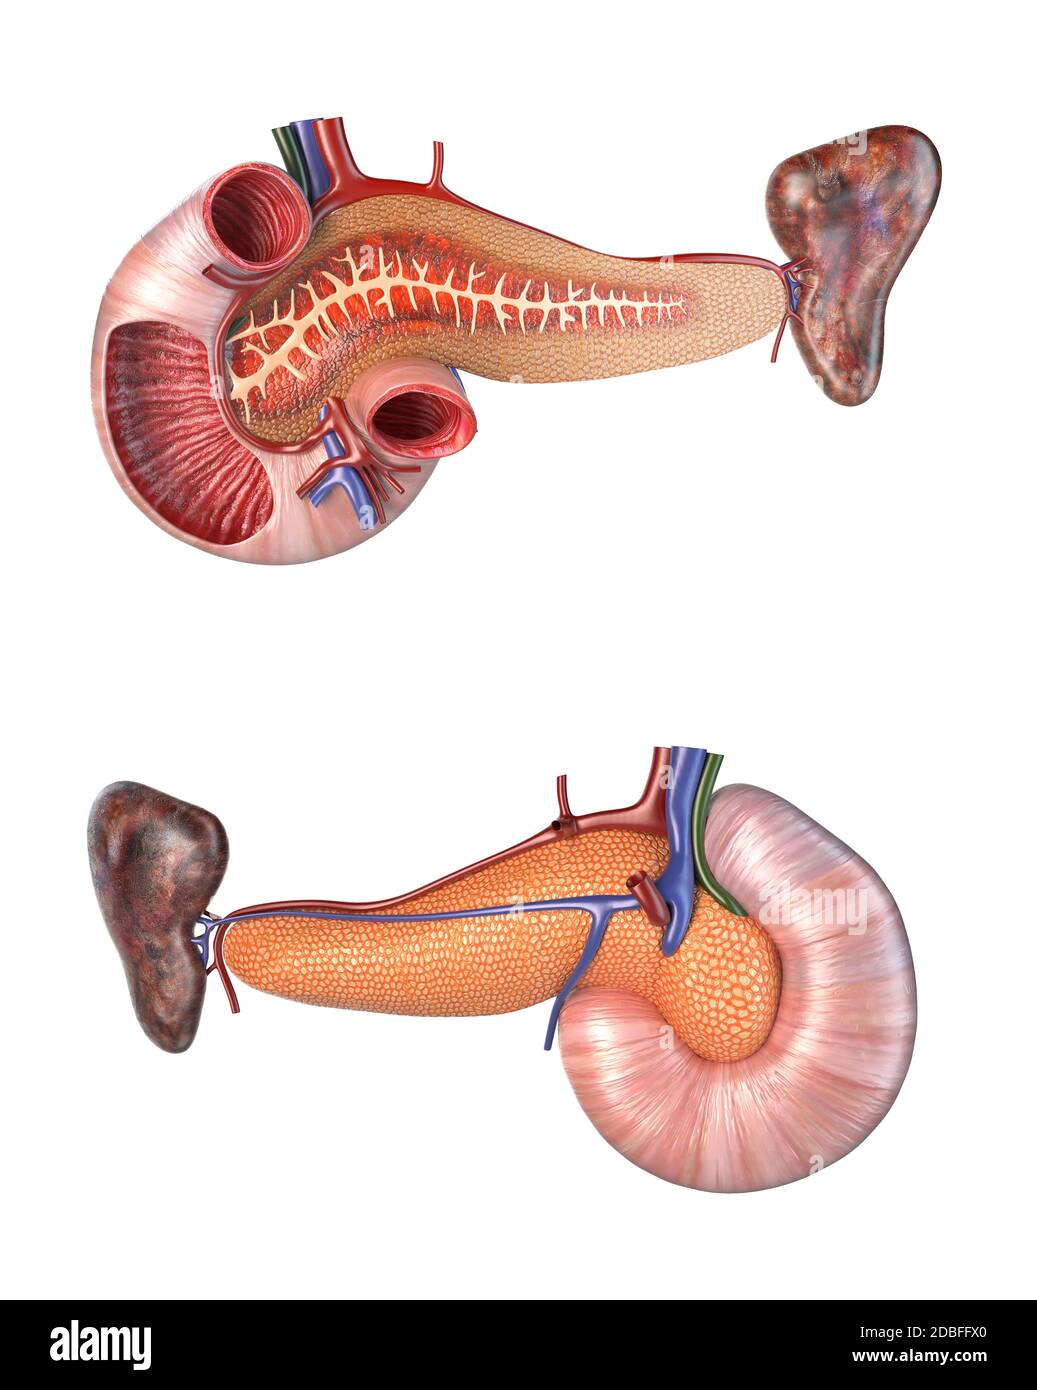 Anatomy human pancreas and duodenum cross section. Front and back views. 3d illustration on white background. Stock Photo